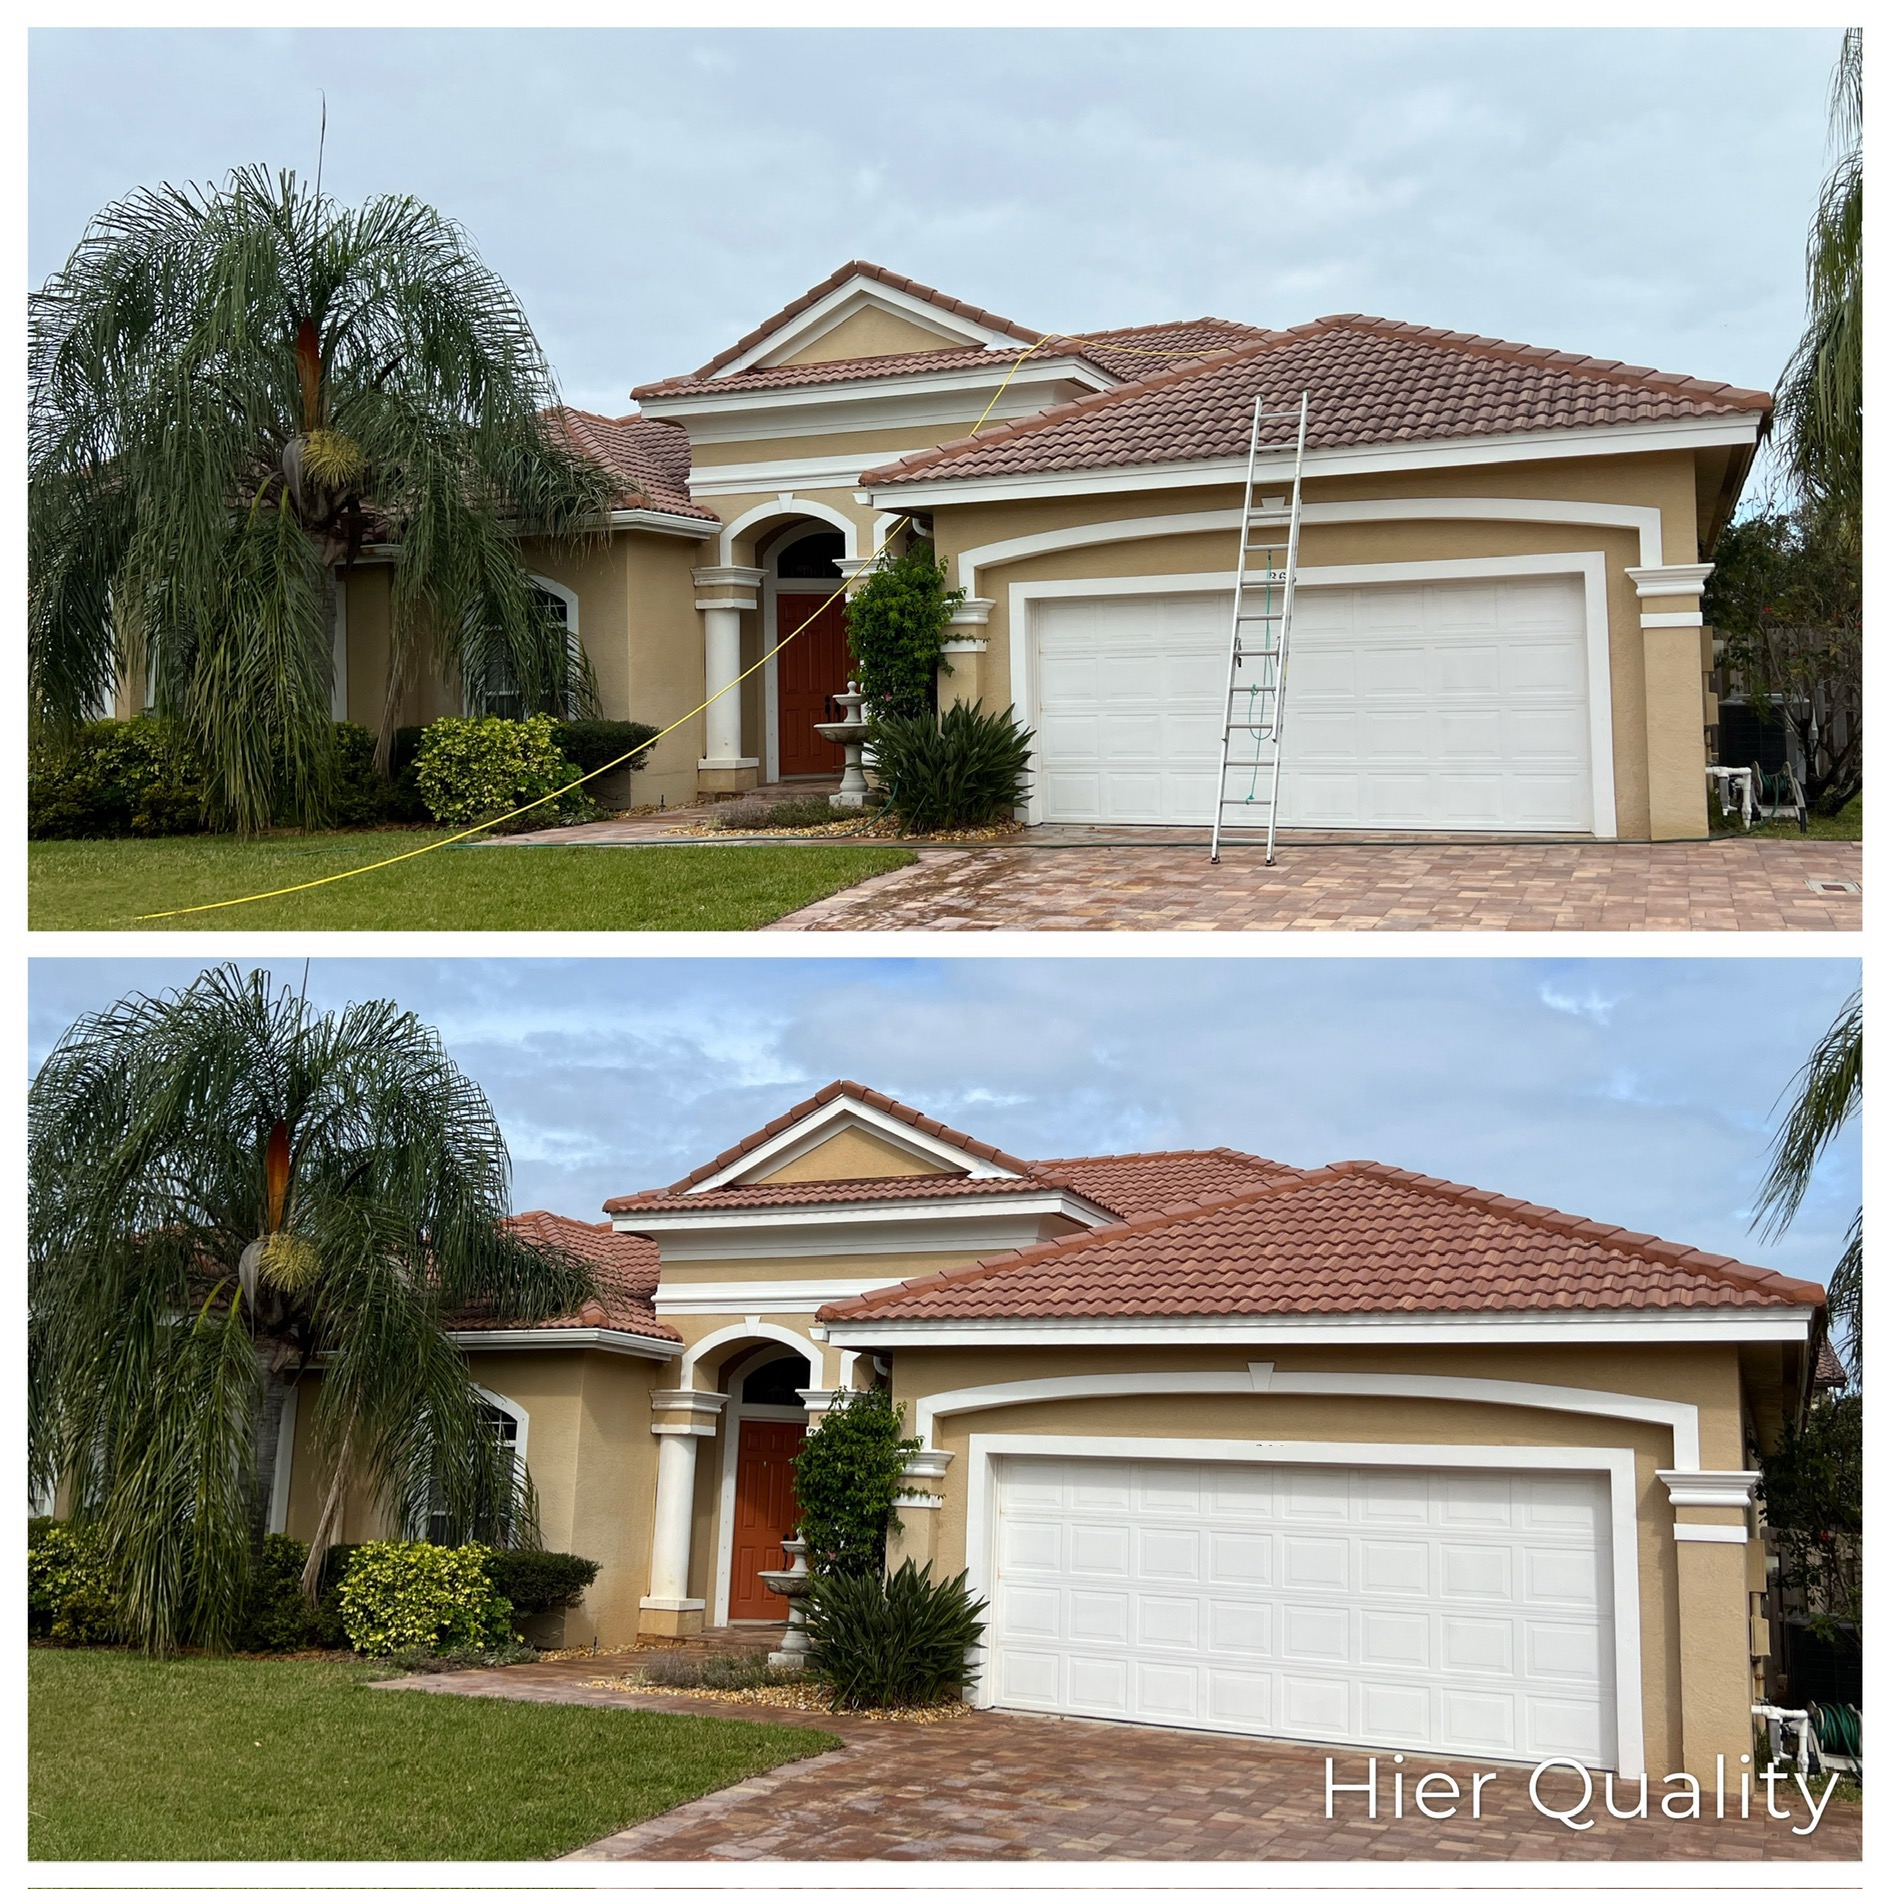 Best Quality Soft Wash Roof Cleaning Performed in Melbourne, FL!